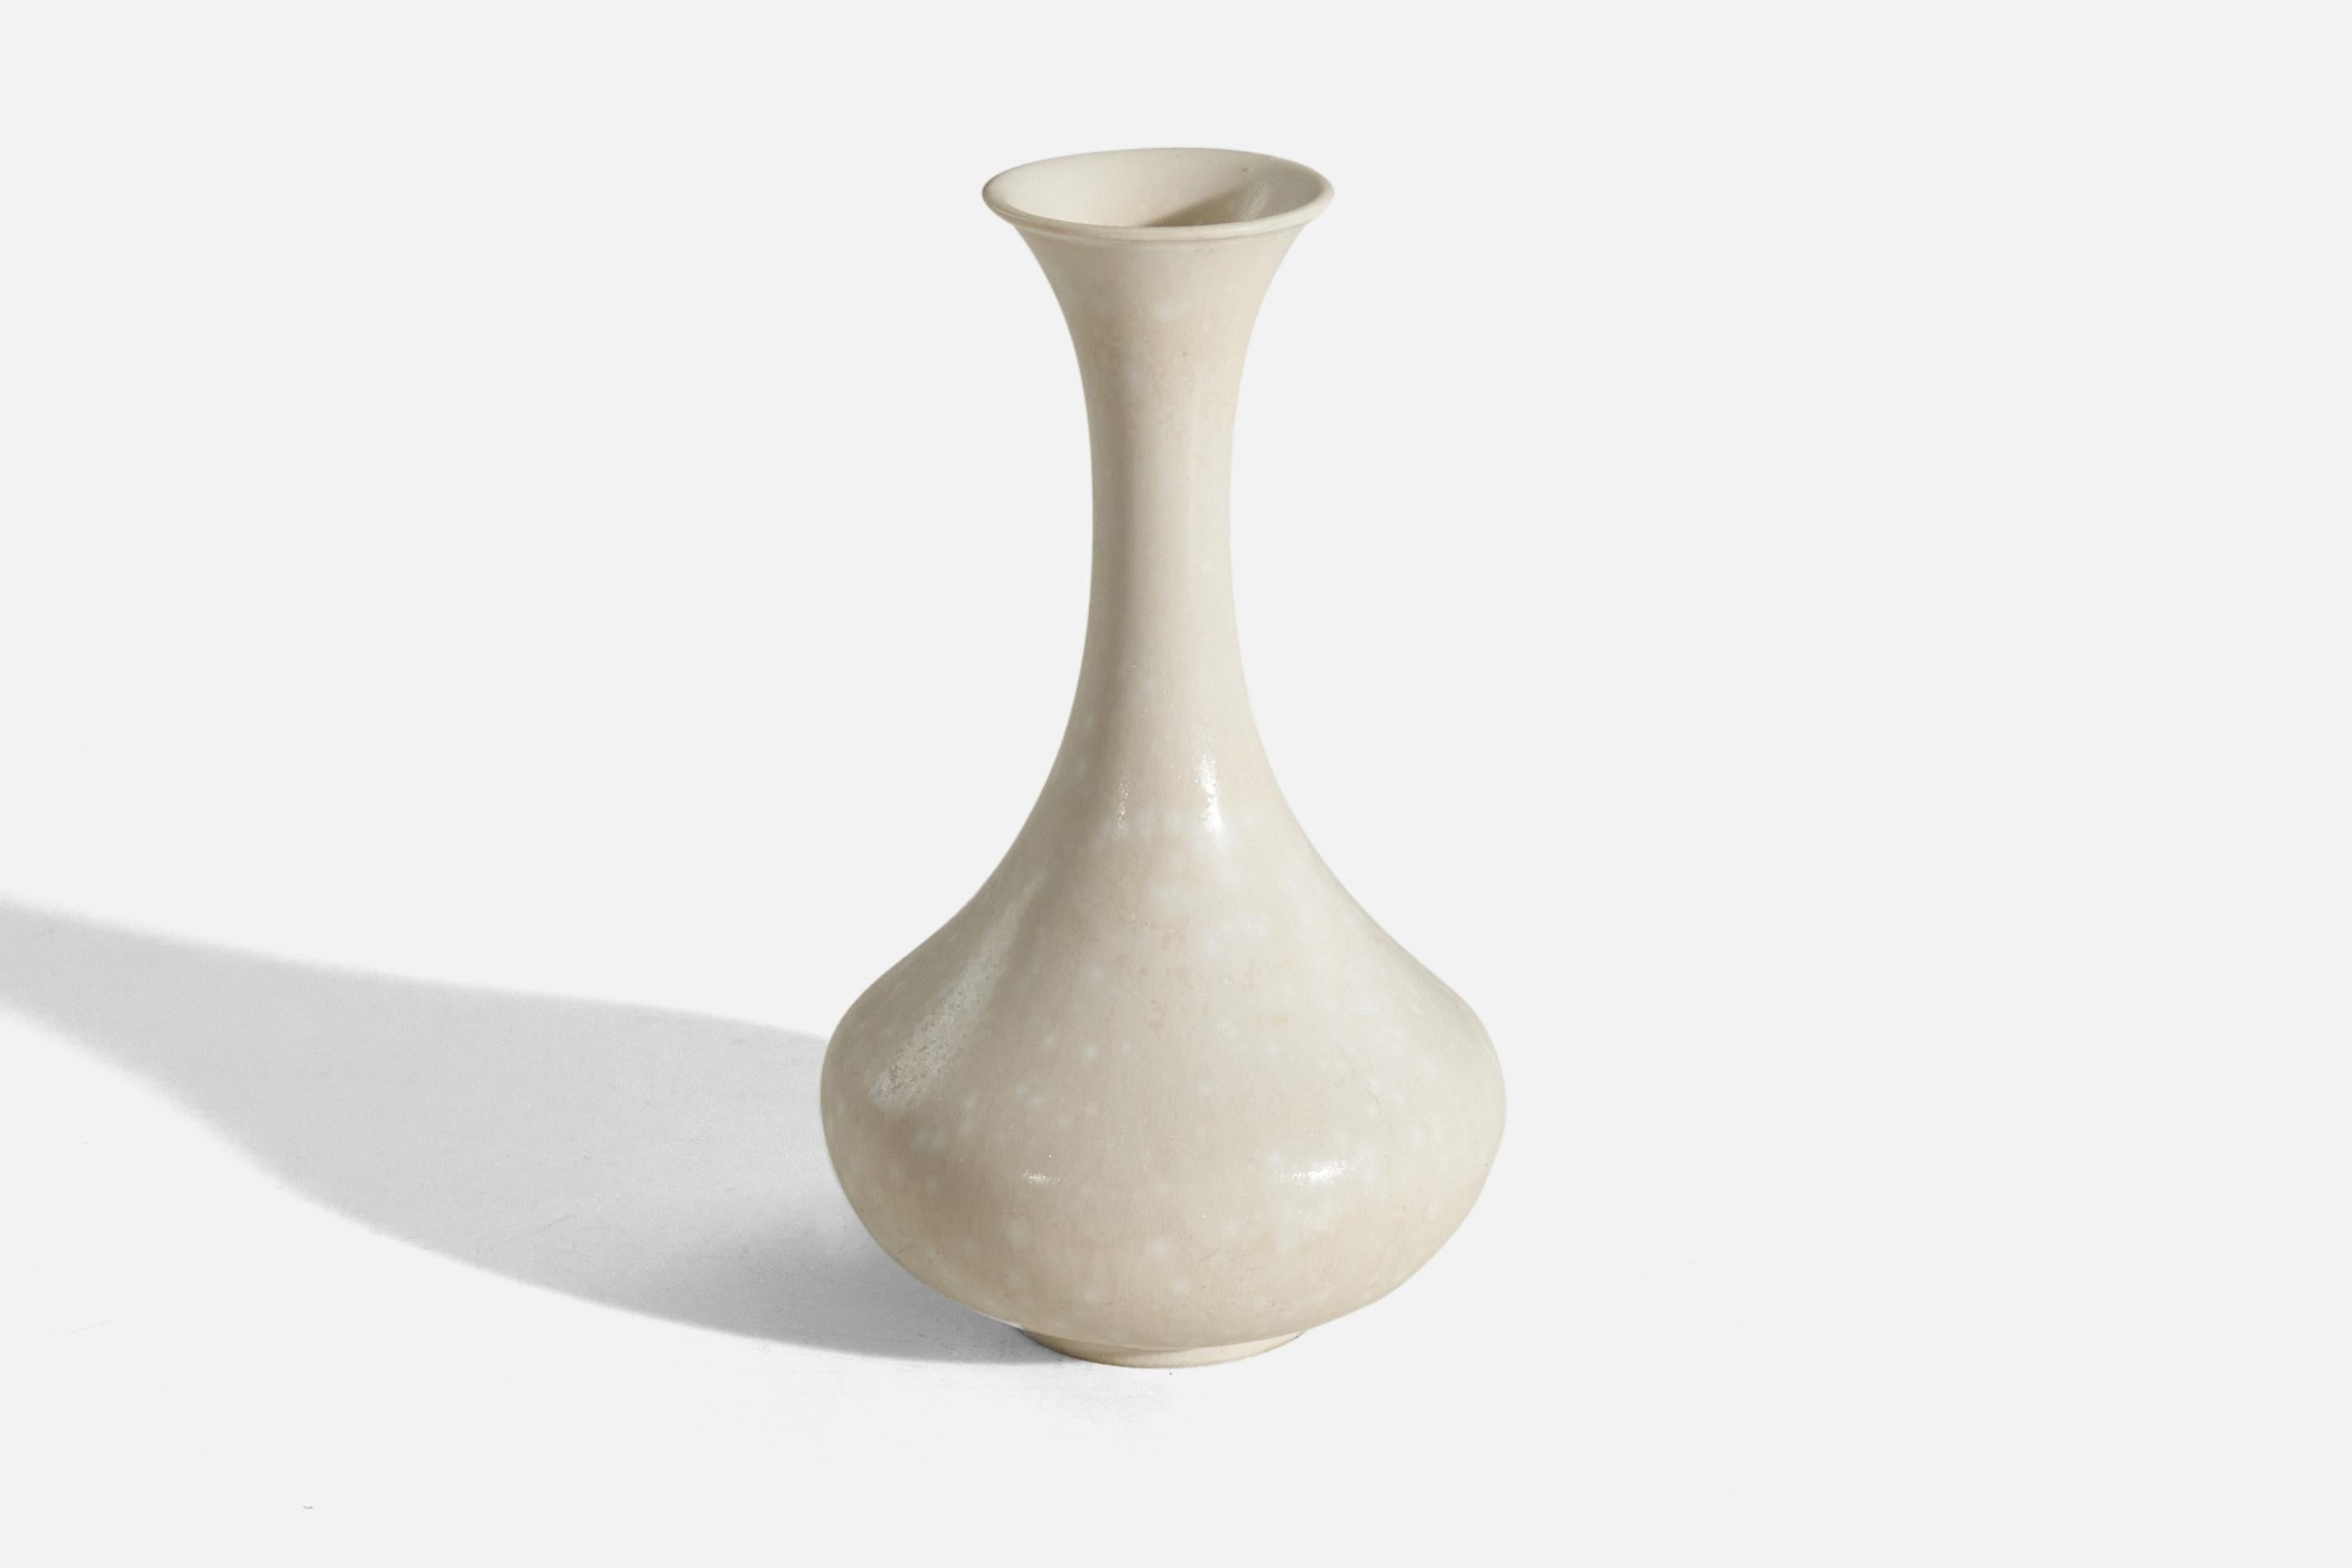 A white, glazed stoneware vase designed by Gunnar Nylund and produced by Rörstrand, Sweden, 1950s.